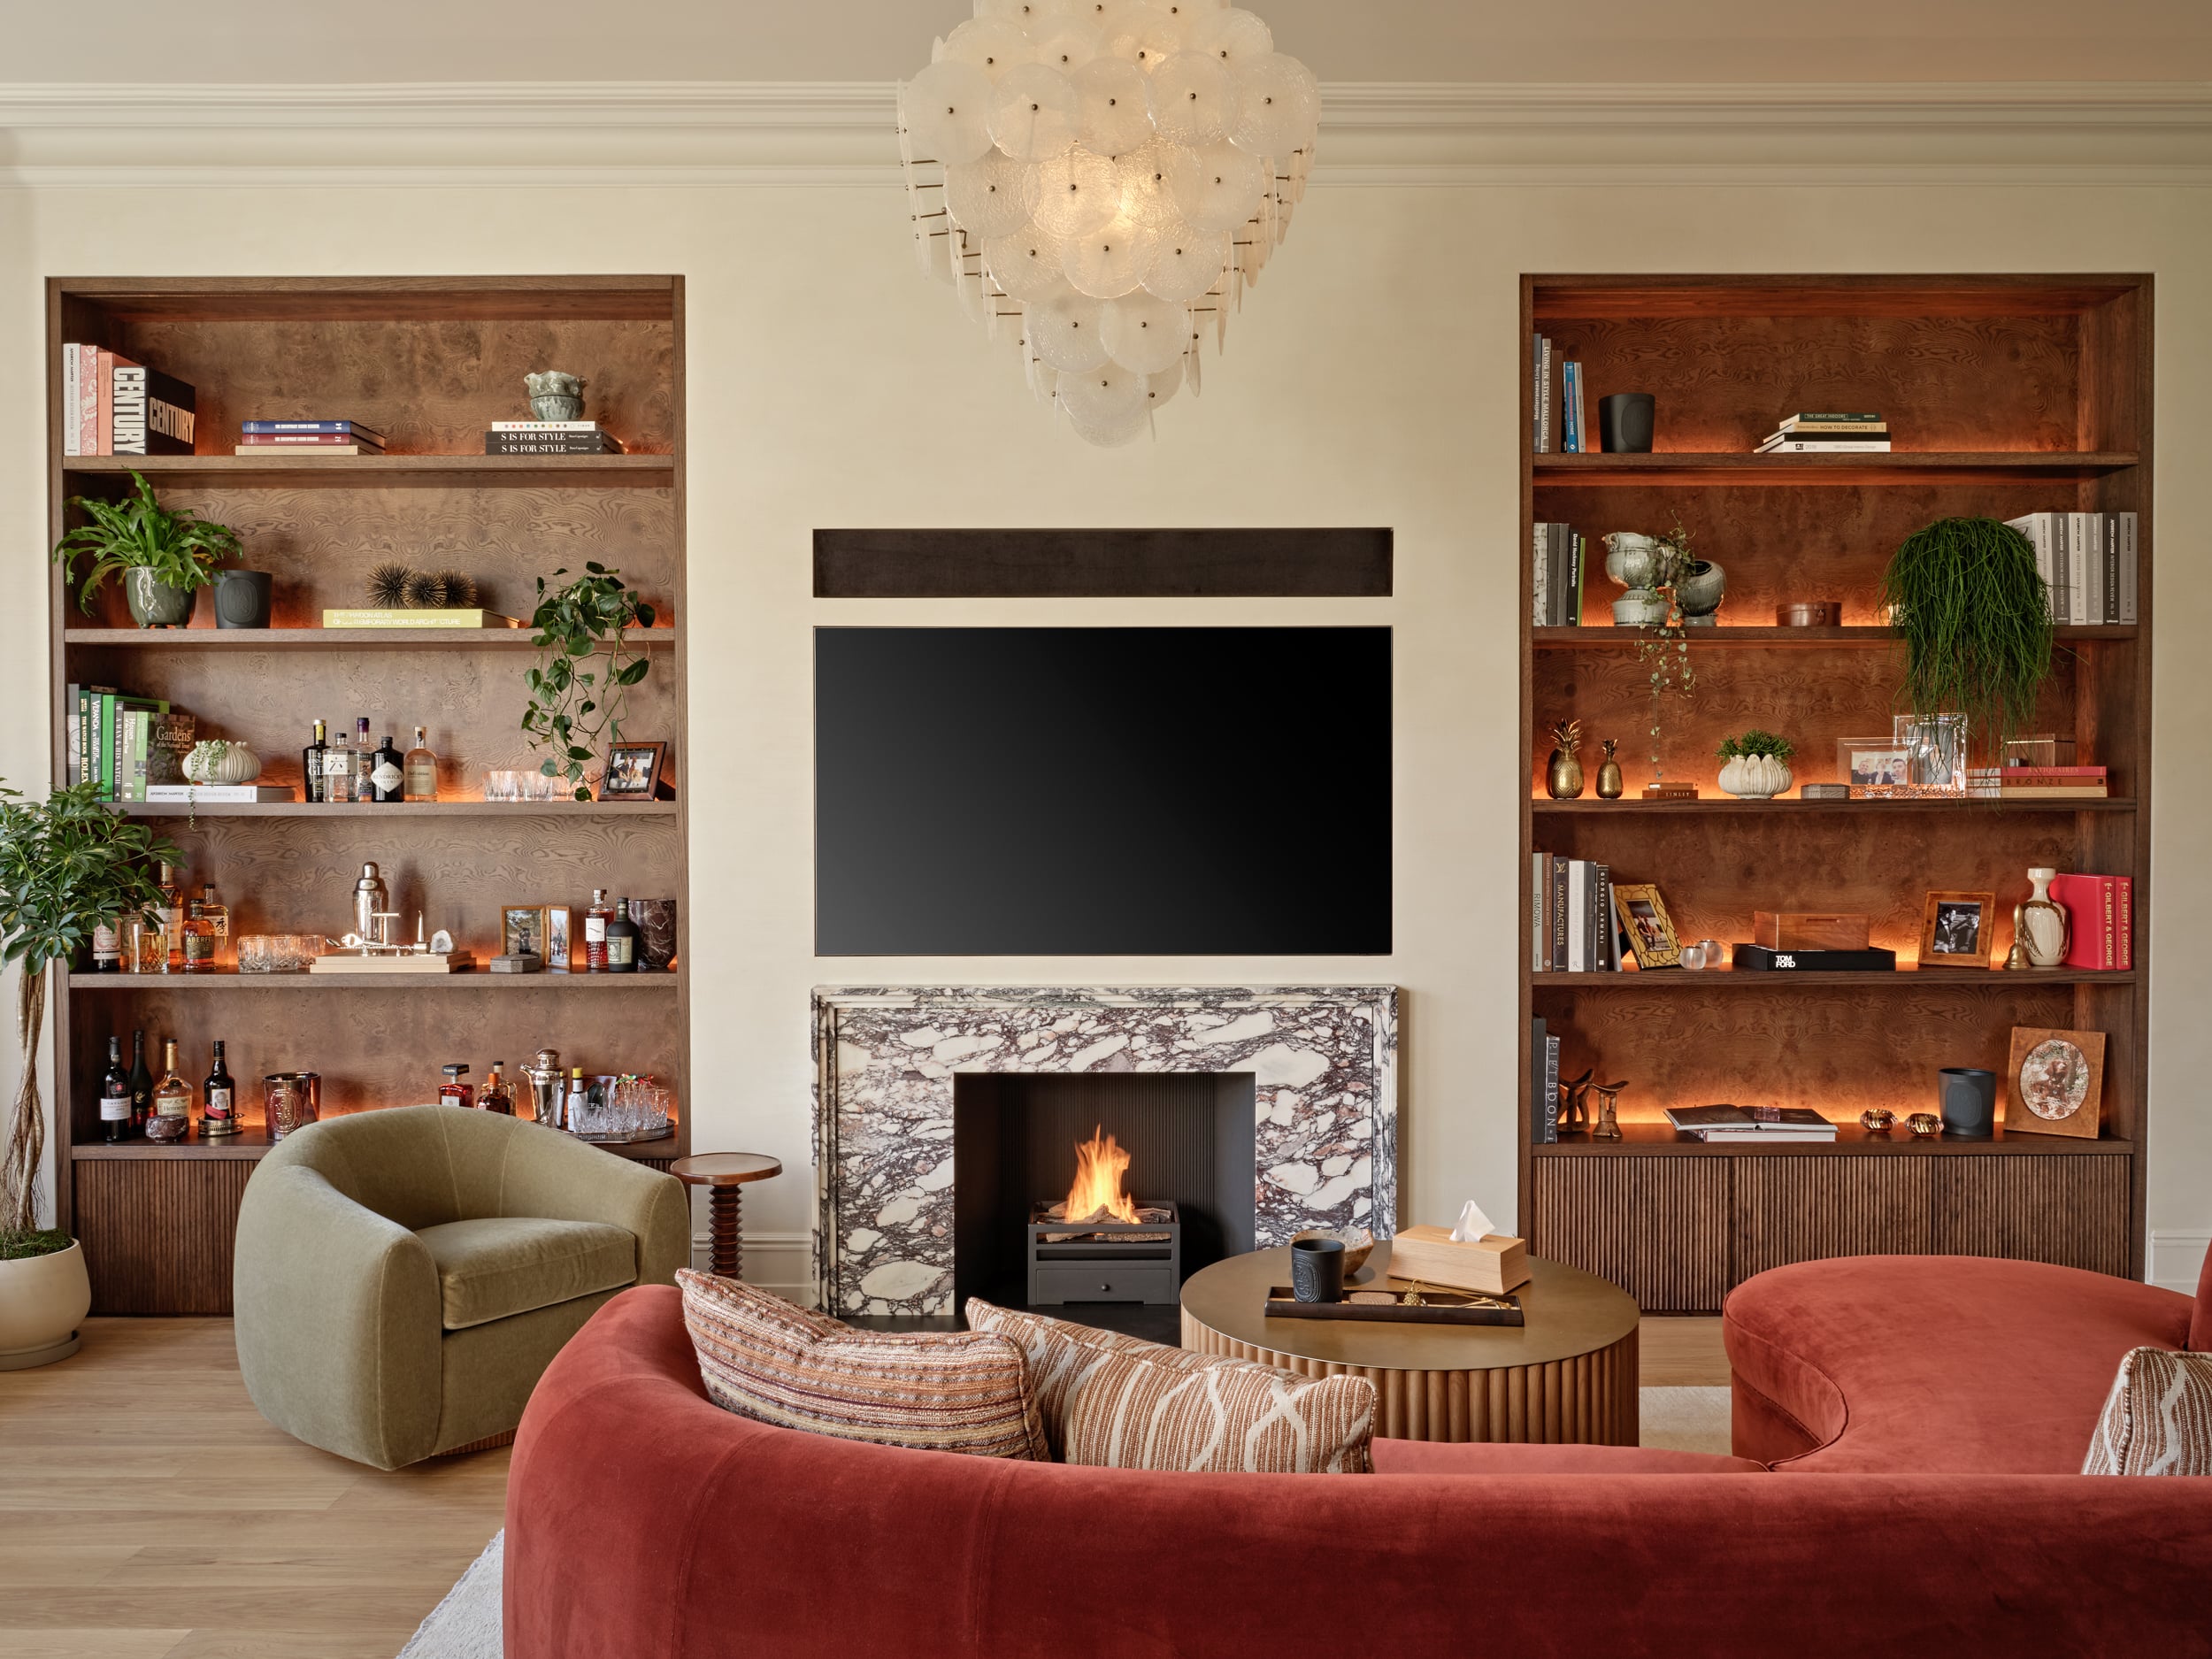 Cozy living space in Central London apartment.On the two sides of the TV and Fireplace there are bespoke shelves displaying sentimental items lovingly collected by the owner.